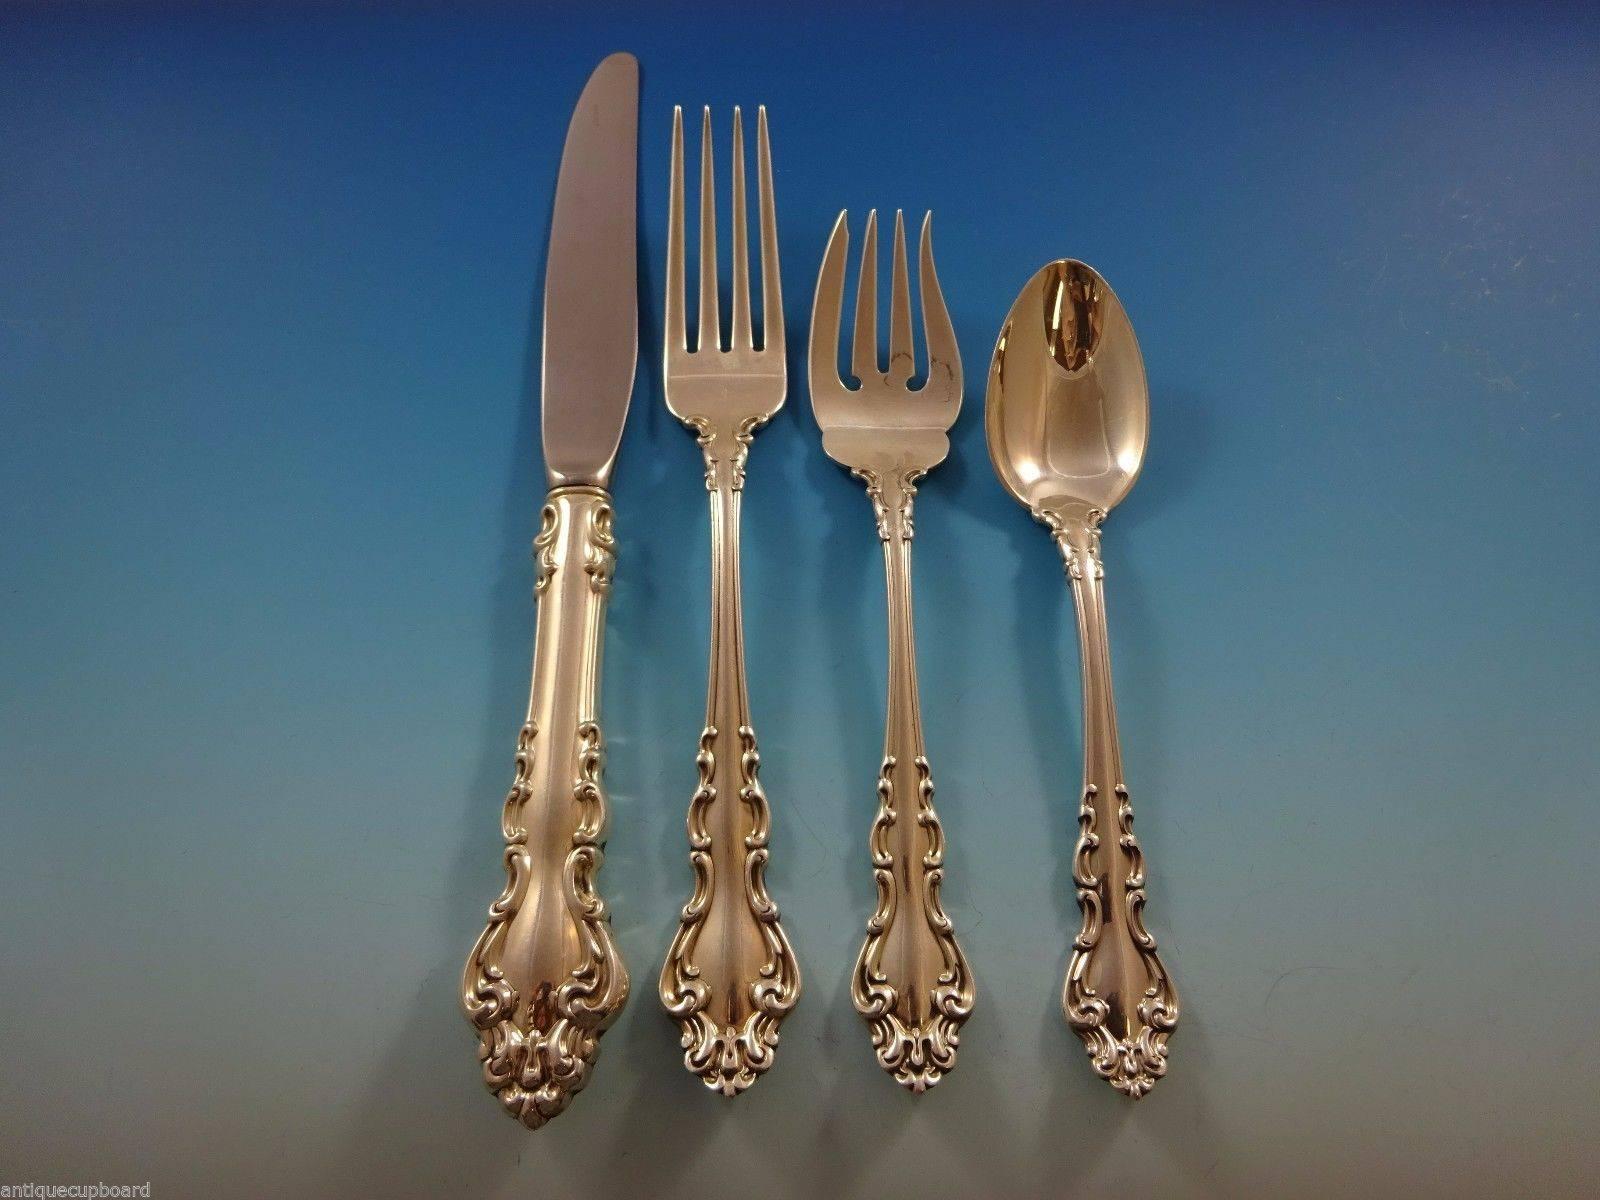 Spanish Baroque by Reed & Barton sterling silver flatware set 52 pieces. This set includes: 

12 knives, 9 1/8